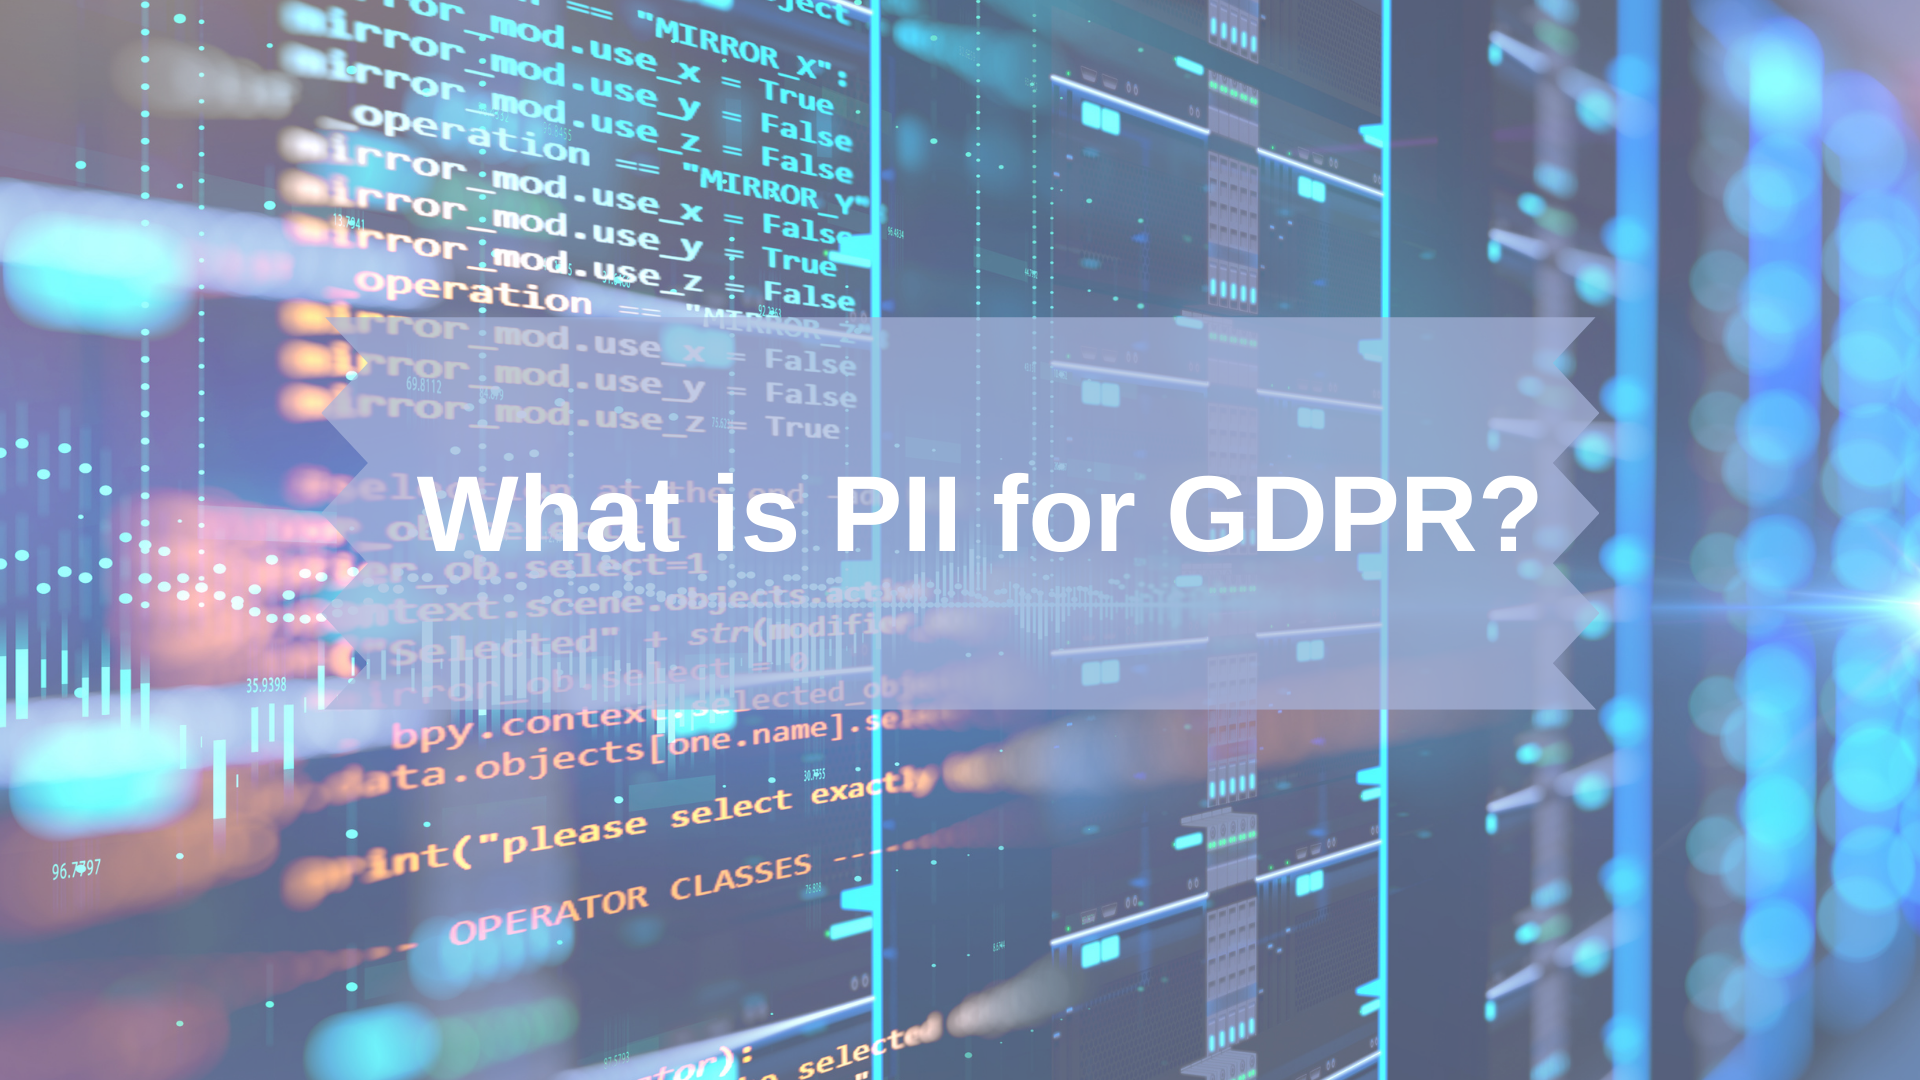 https://groundlabs-dev.centreblue.com/wp-content/uploads/2018/12/What-is-PII-for-GDPR.png